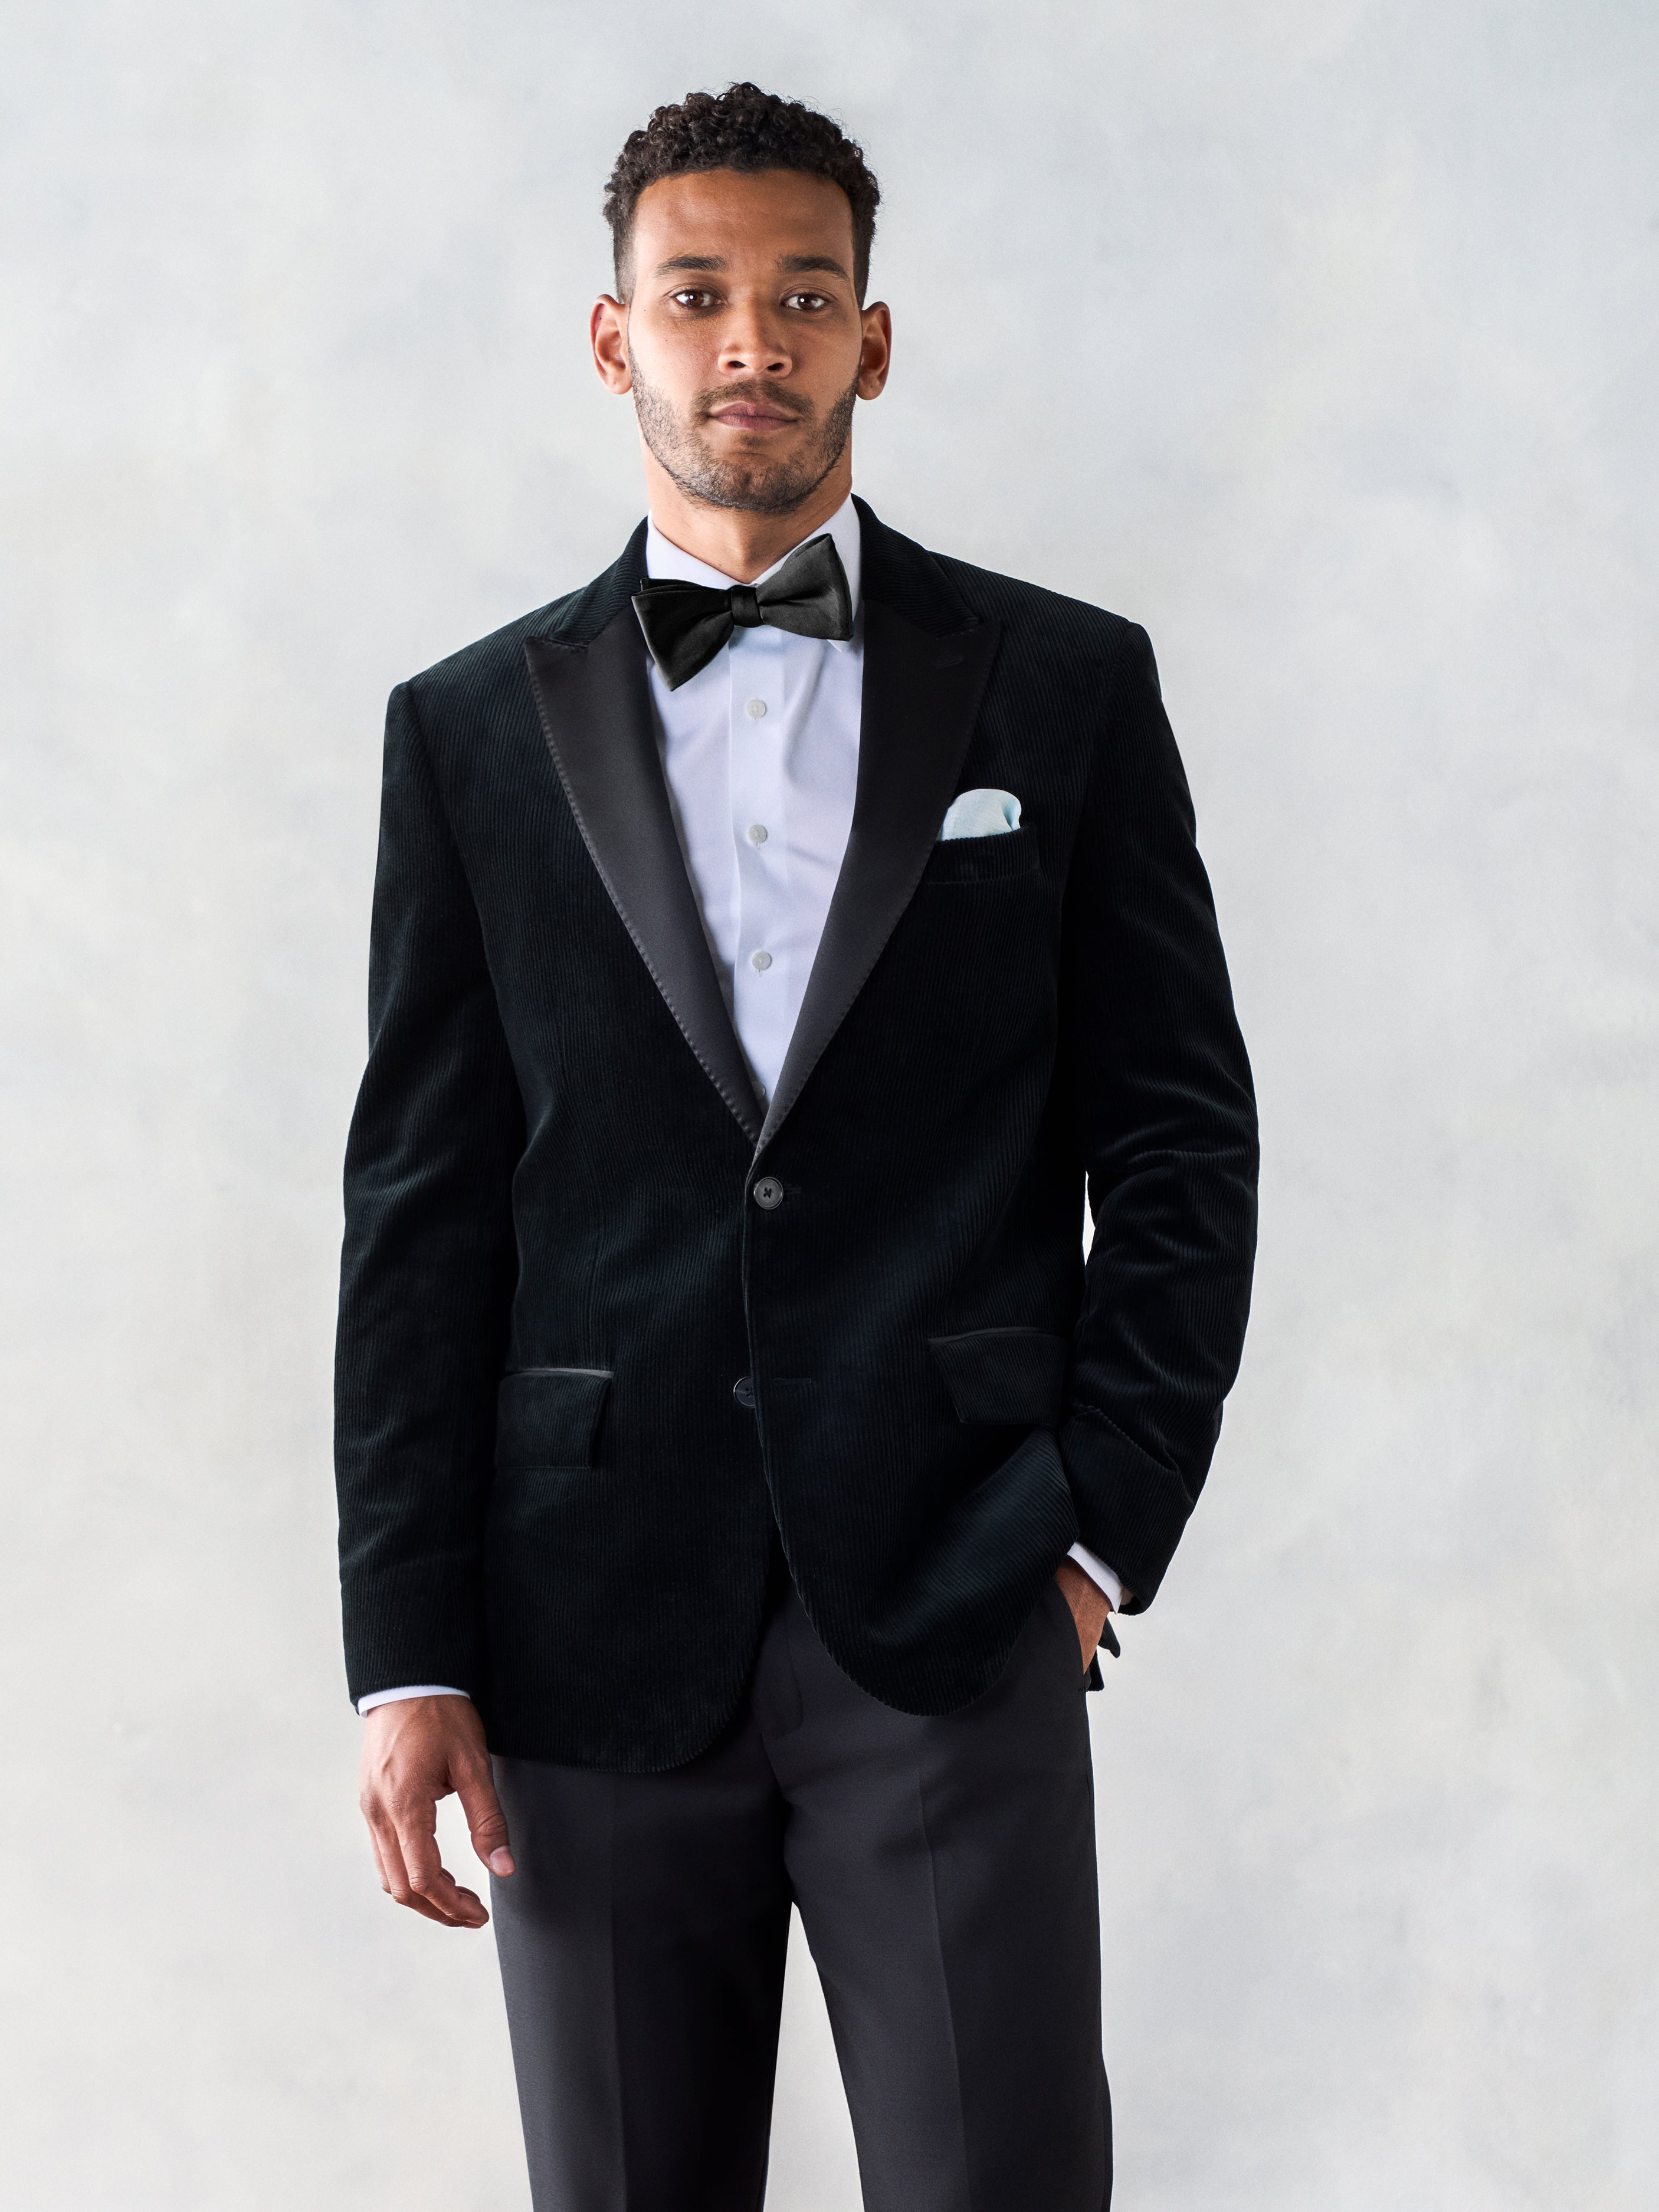 Black Slim Fit Business Black Tuxedo Suit For Men Single Breasted Three  Piece Set For Groom Party And Work Wear From Kuaileju, $87.67 | DHgate.Com